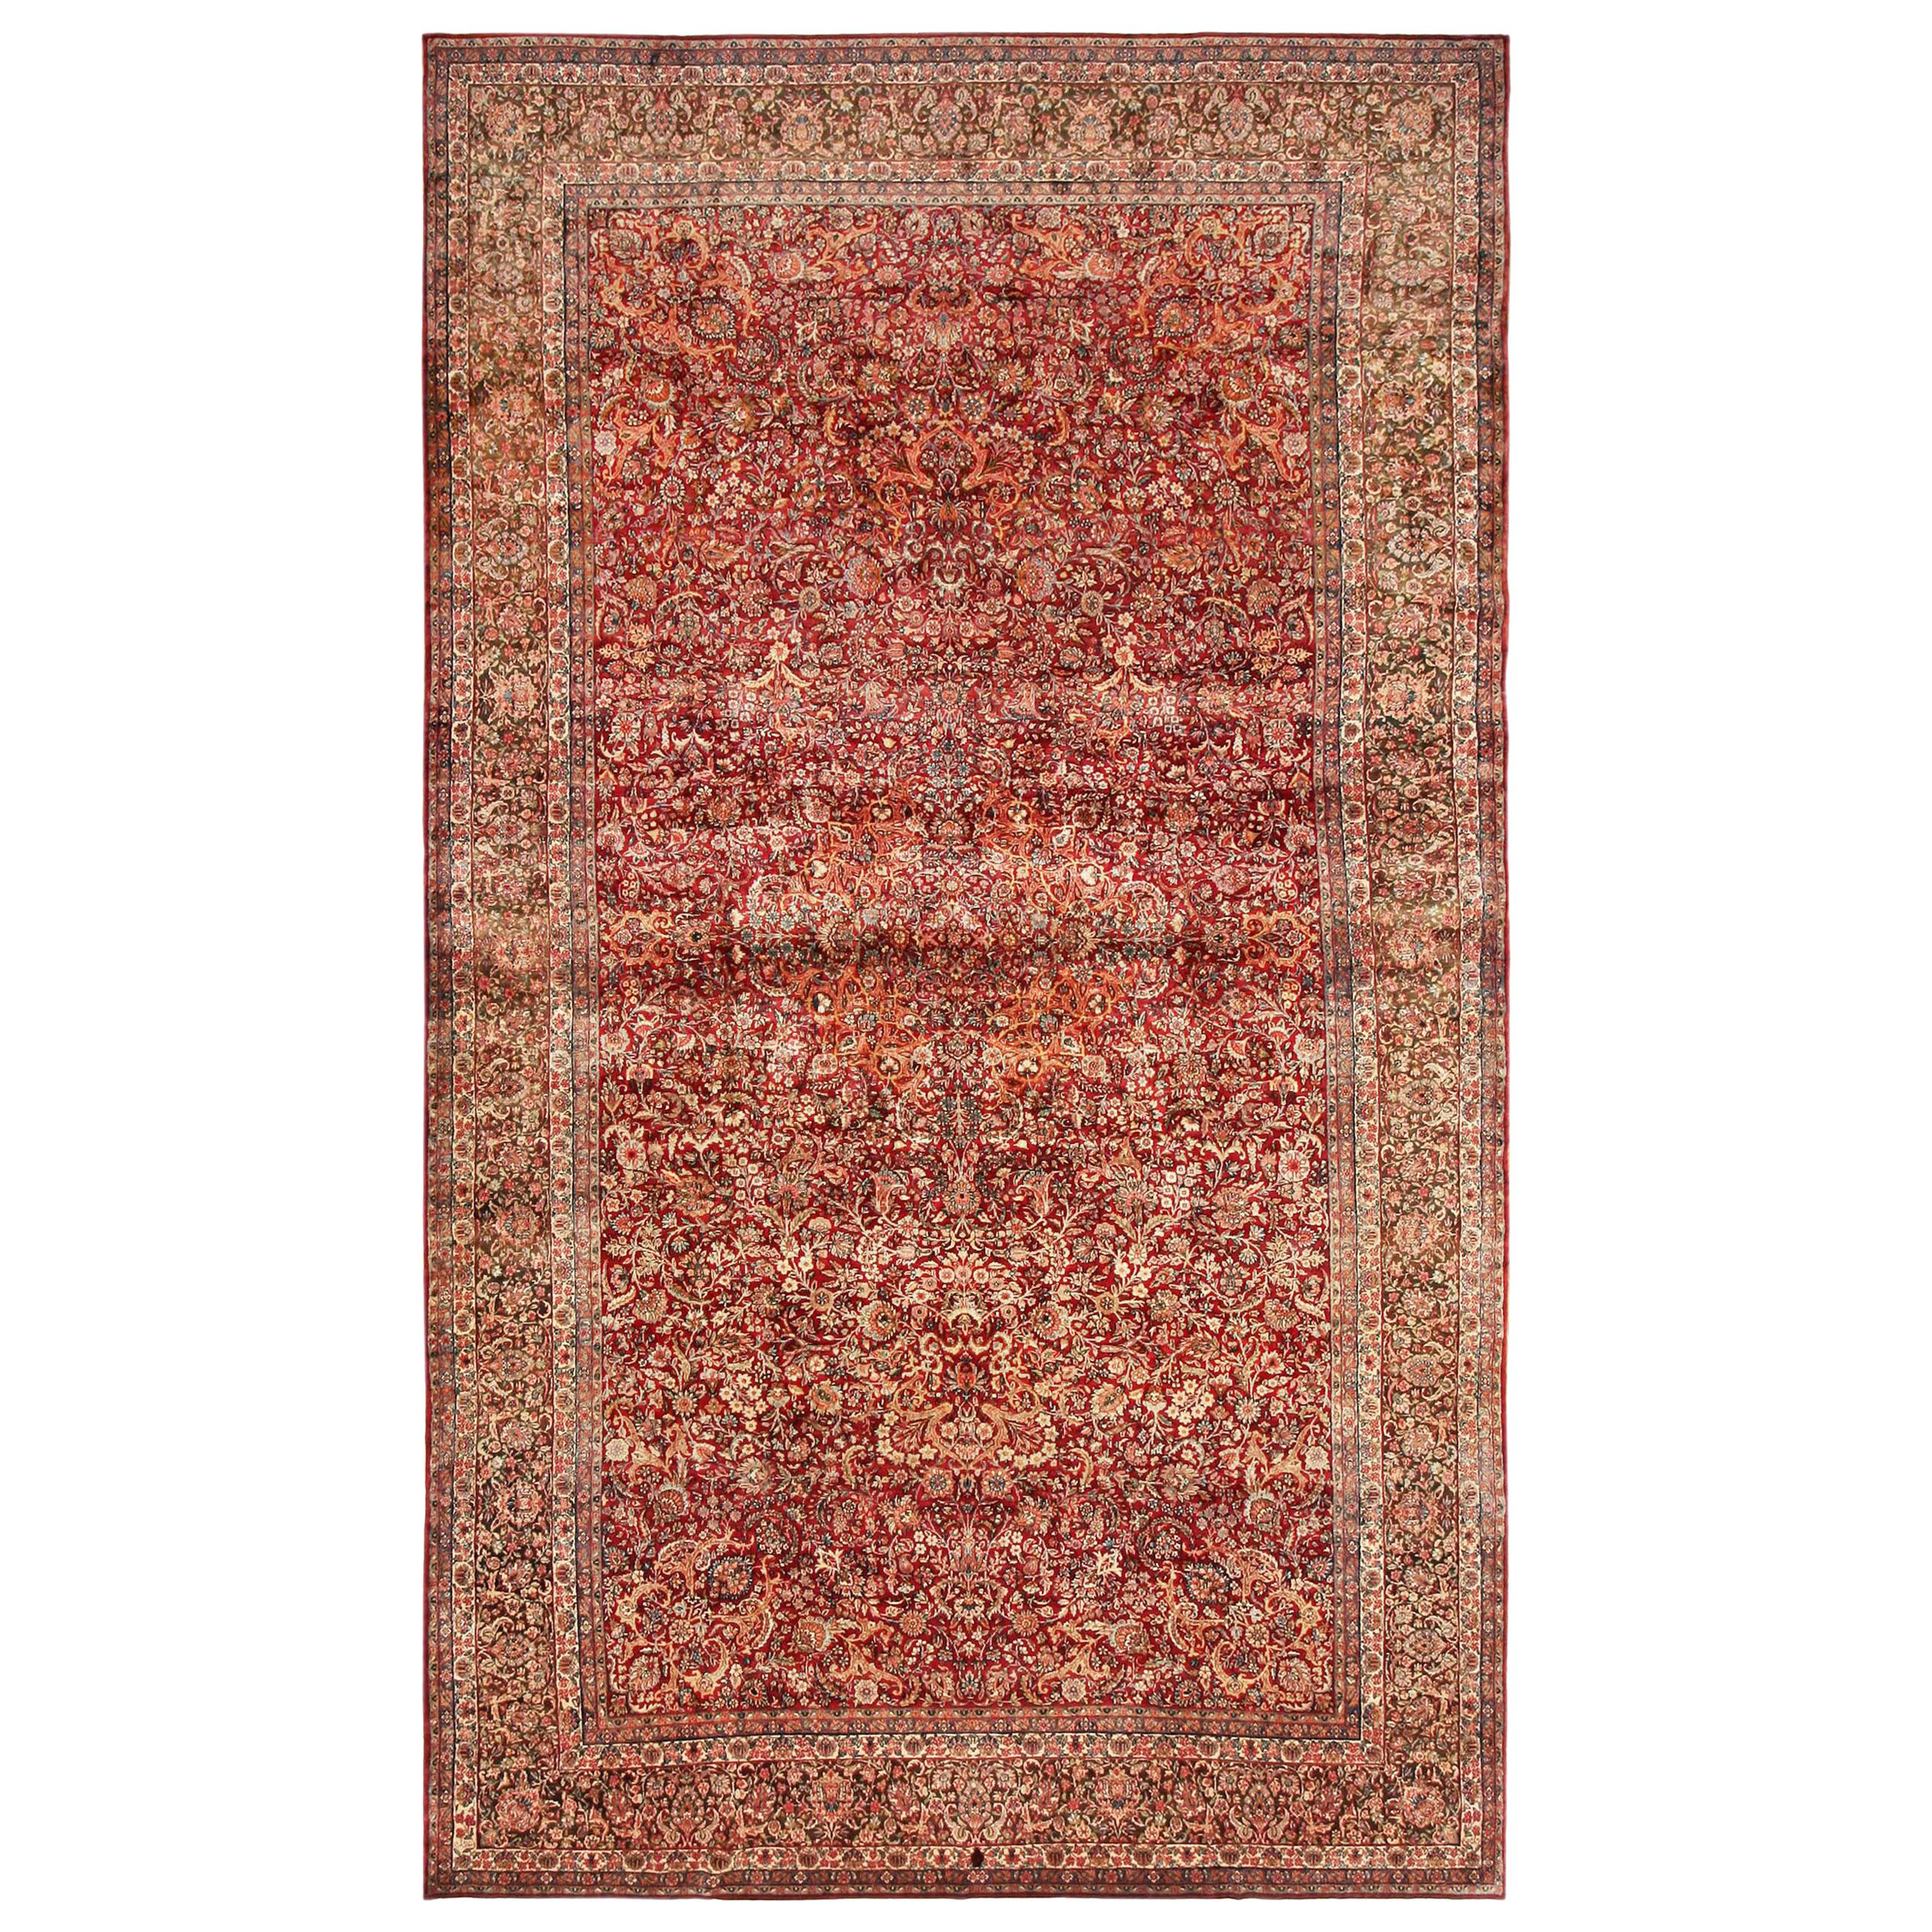 Antique Kerman Persian Rug. Size: 9 ft 9 in x 17 ft 3 in (2.97 m x 5.26 m)